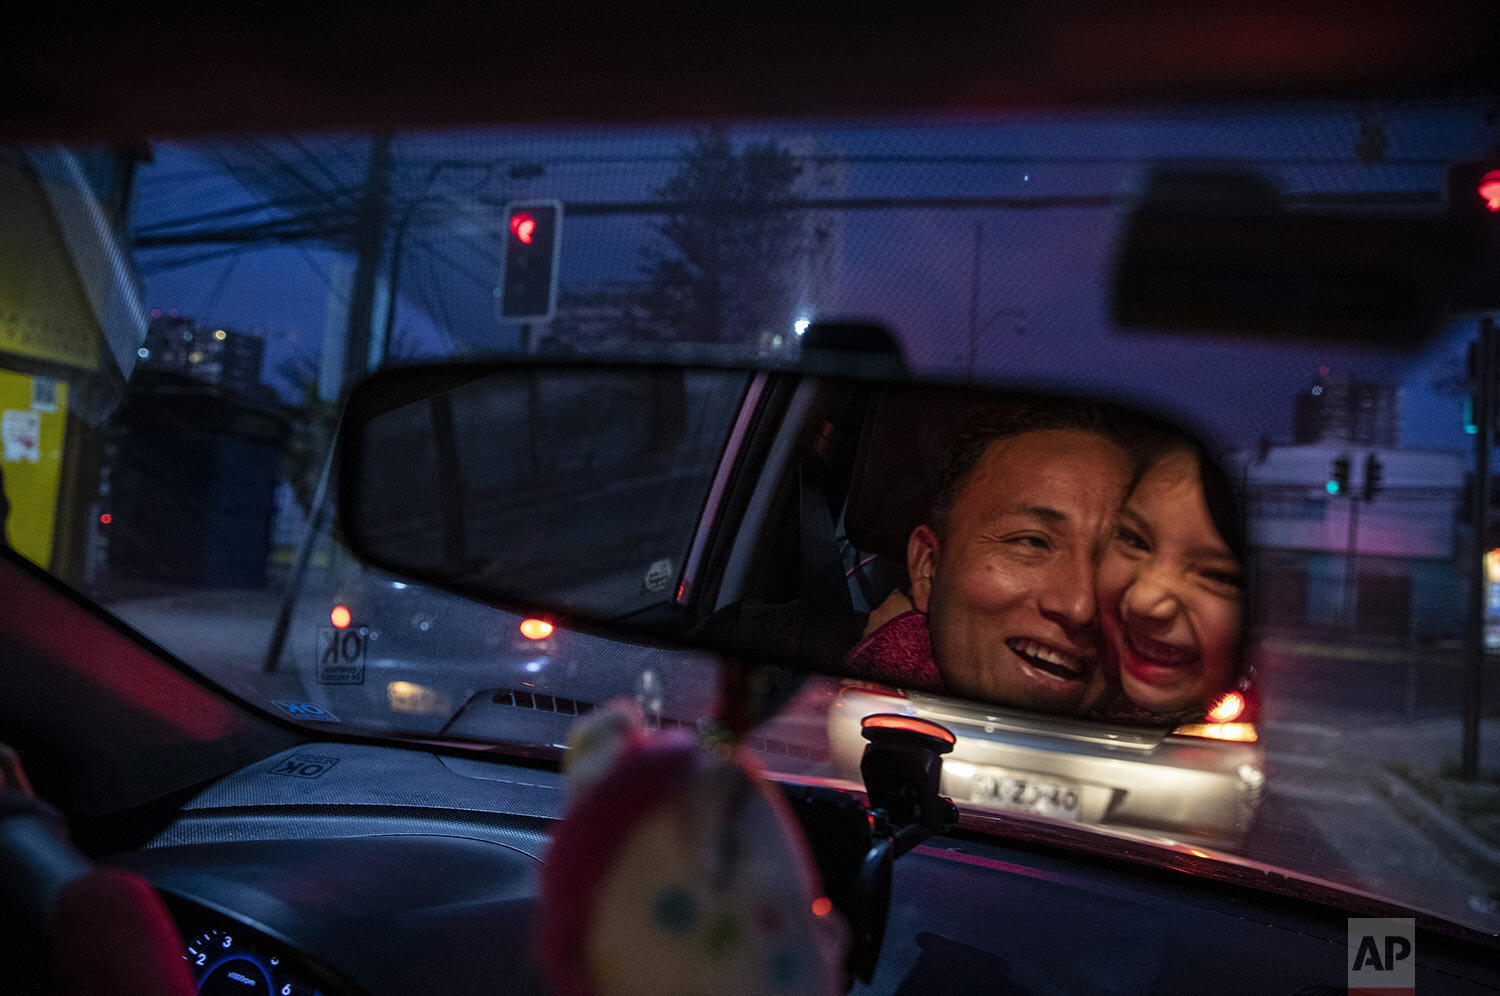  Reflected in the rearview mirror, Jose Collantes gets a hug from daughter Kehity while they're stopped at a red light, as Jose drives his five-year-old home from a playdate in Santiago, Chile, Sept. 6, 2020, three months after they lost his wife, he